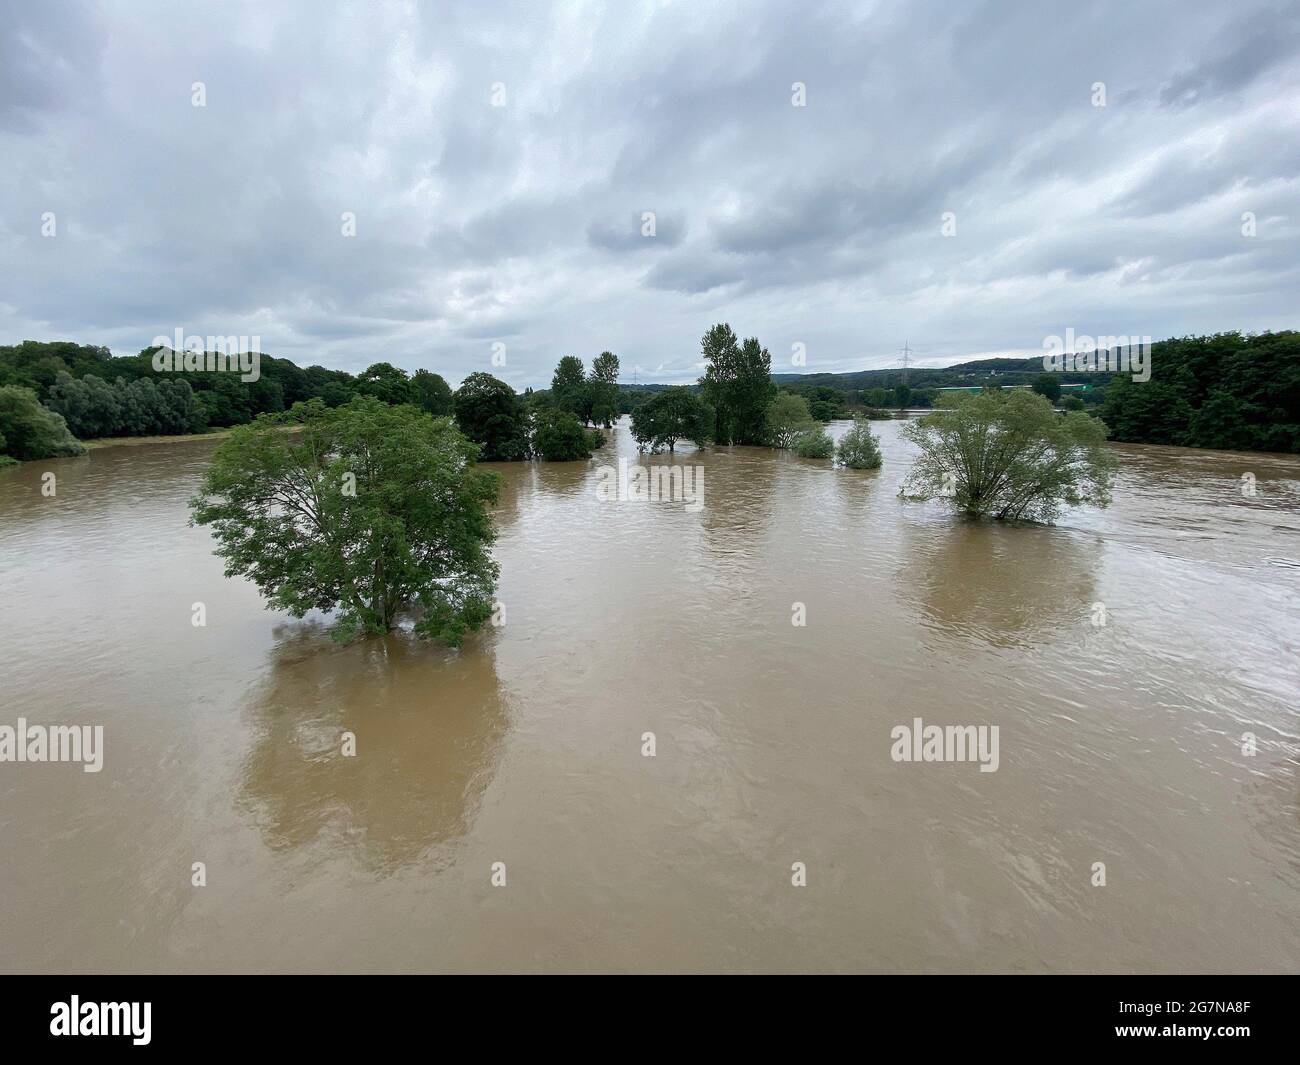 firo: 15.07.2021, country and people, weather, floods in North Rhine-Westphalia, flooding, heavy rain, Bochum, the Ruhr near Stiepel has overflowed its banks, cycle paths and walking paths are flooded, Stock Photo